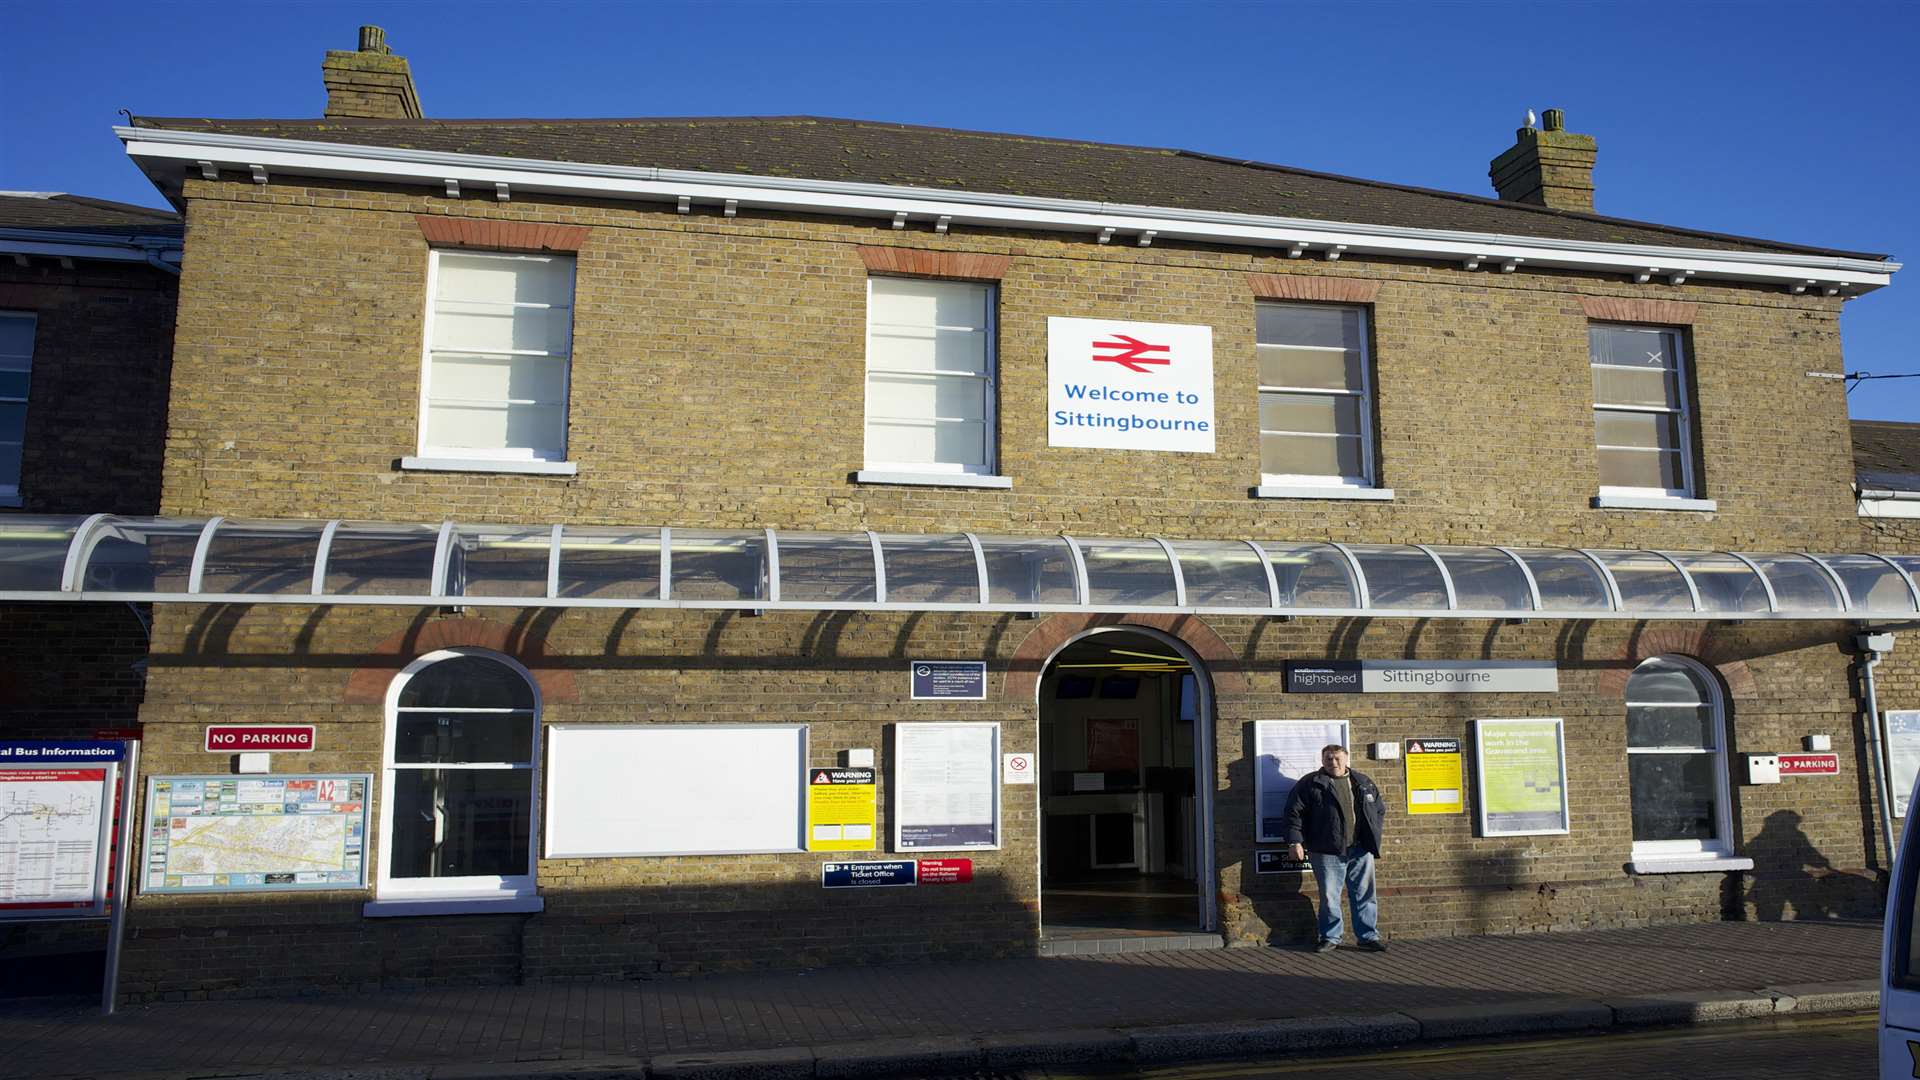 The man boarded the train with other passengers at Sittingbourne railway station